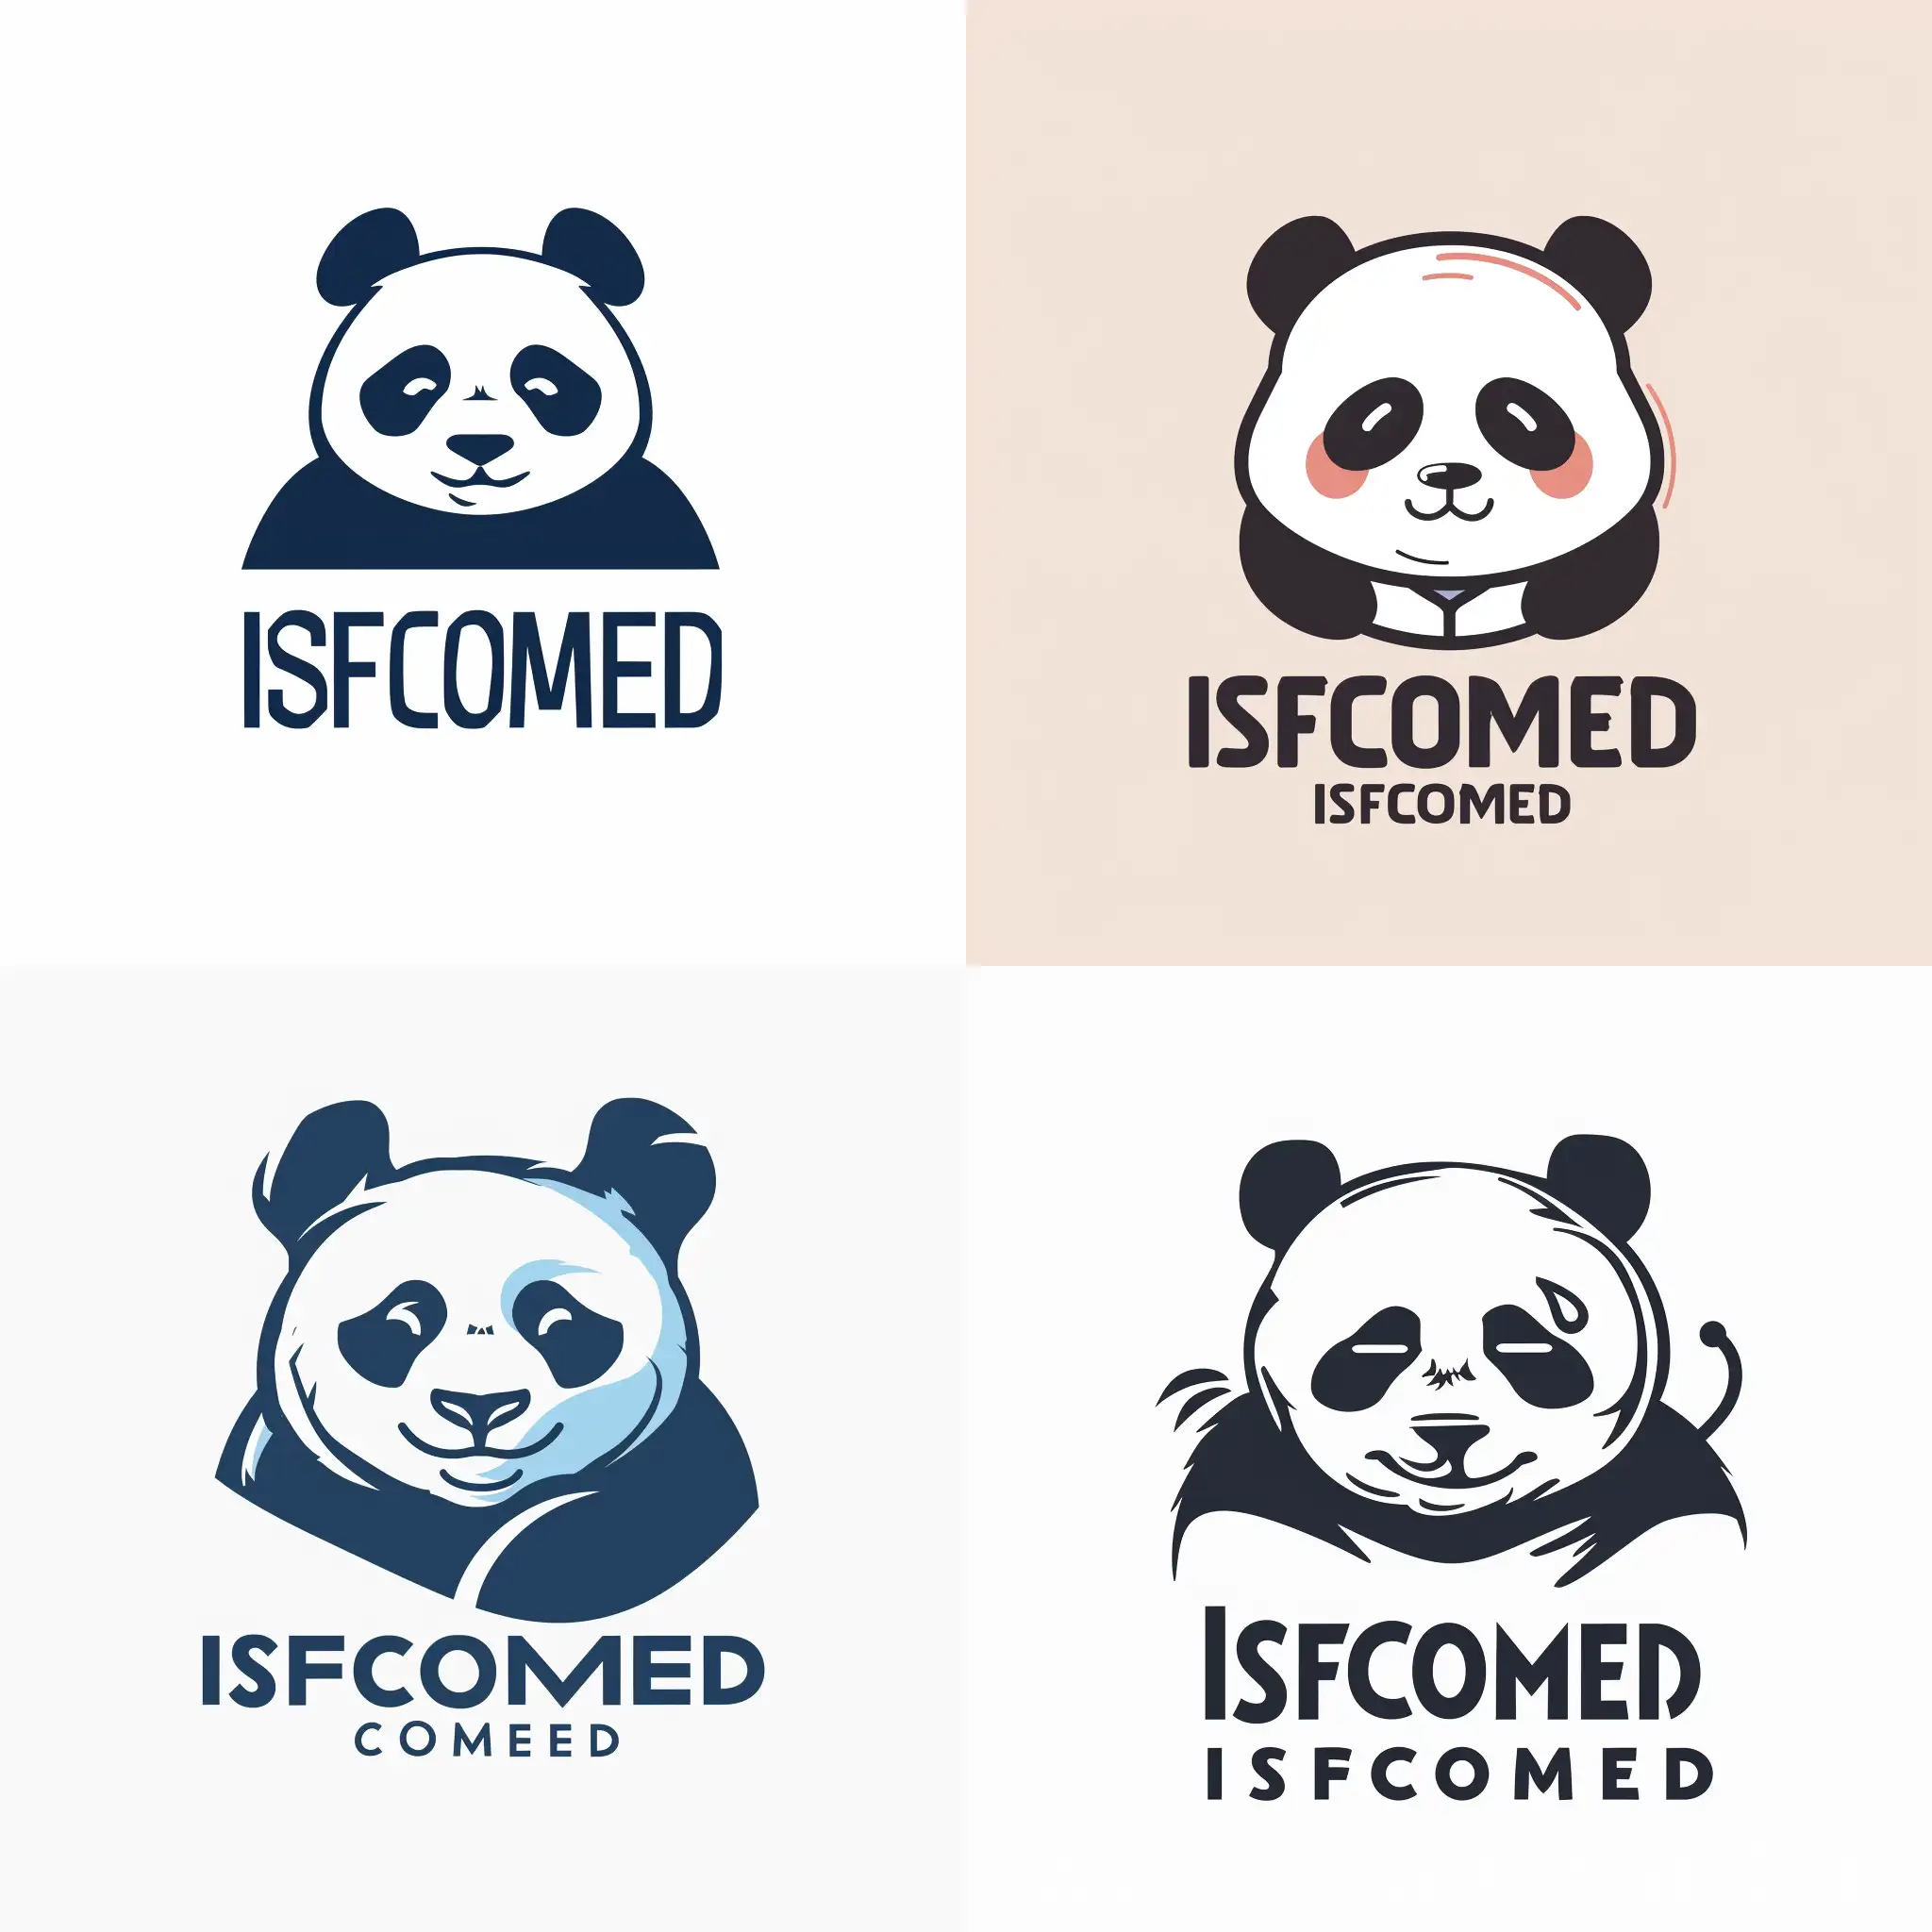 Hello, I want a logo for my project. The name of the project is ISFCOMED and the symbol of the organization is Panda. Also, this project is related to medical education.
So draw me a logo of a doctor panda with the words “ISFCOMED” underneath.